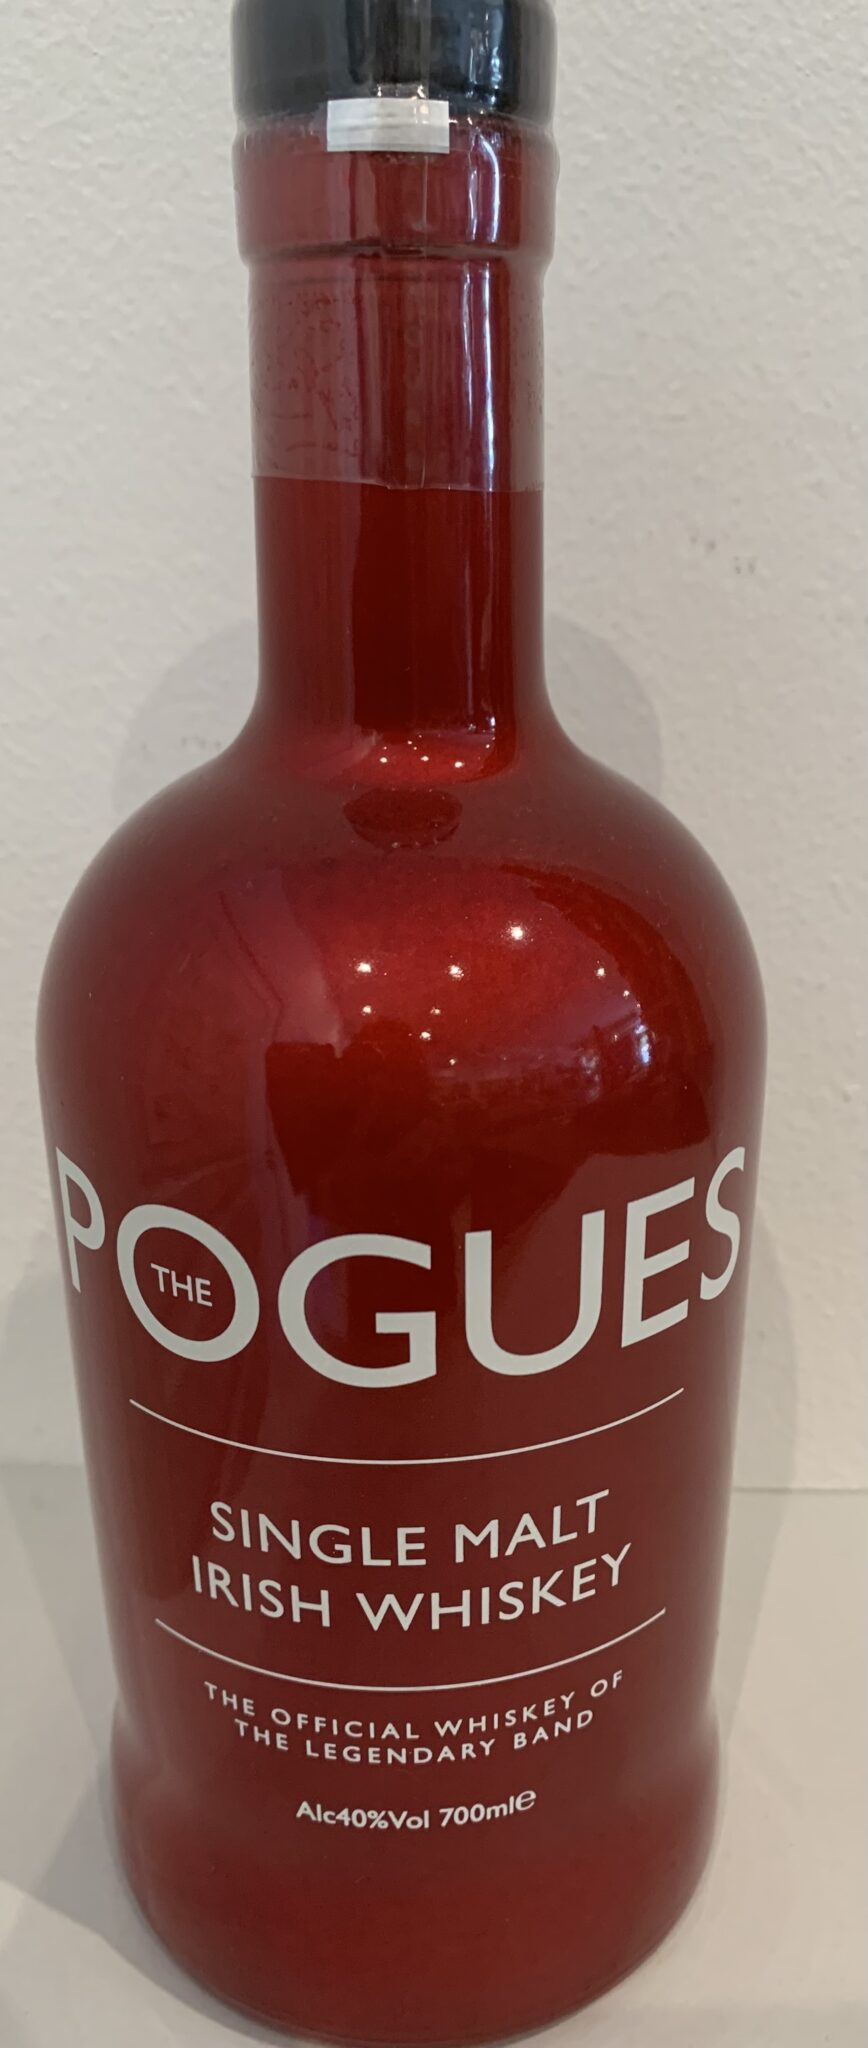 Whisky irlandais - The Pogues - 70cl